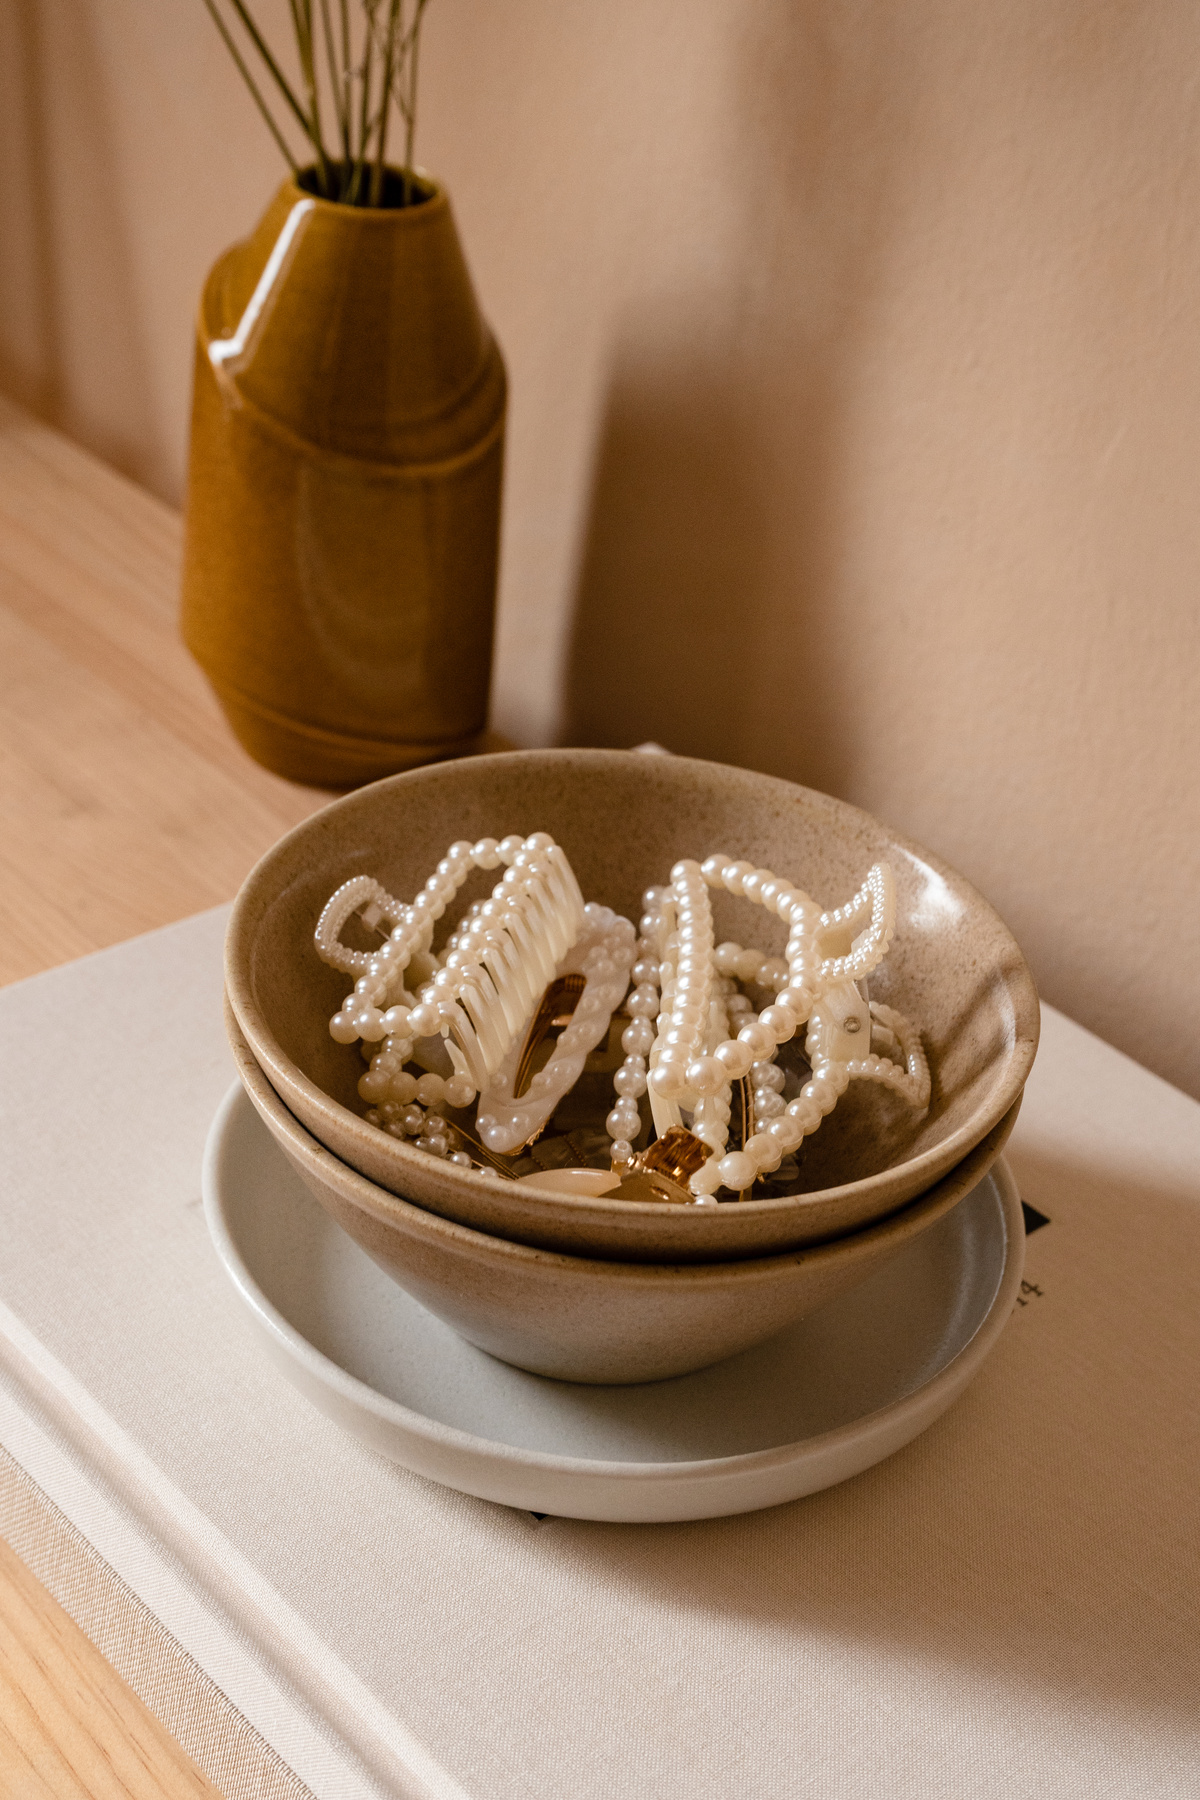 Pearl Claw Clips in Ceramic Bowl 